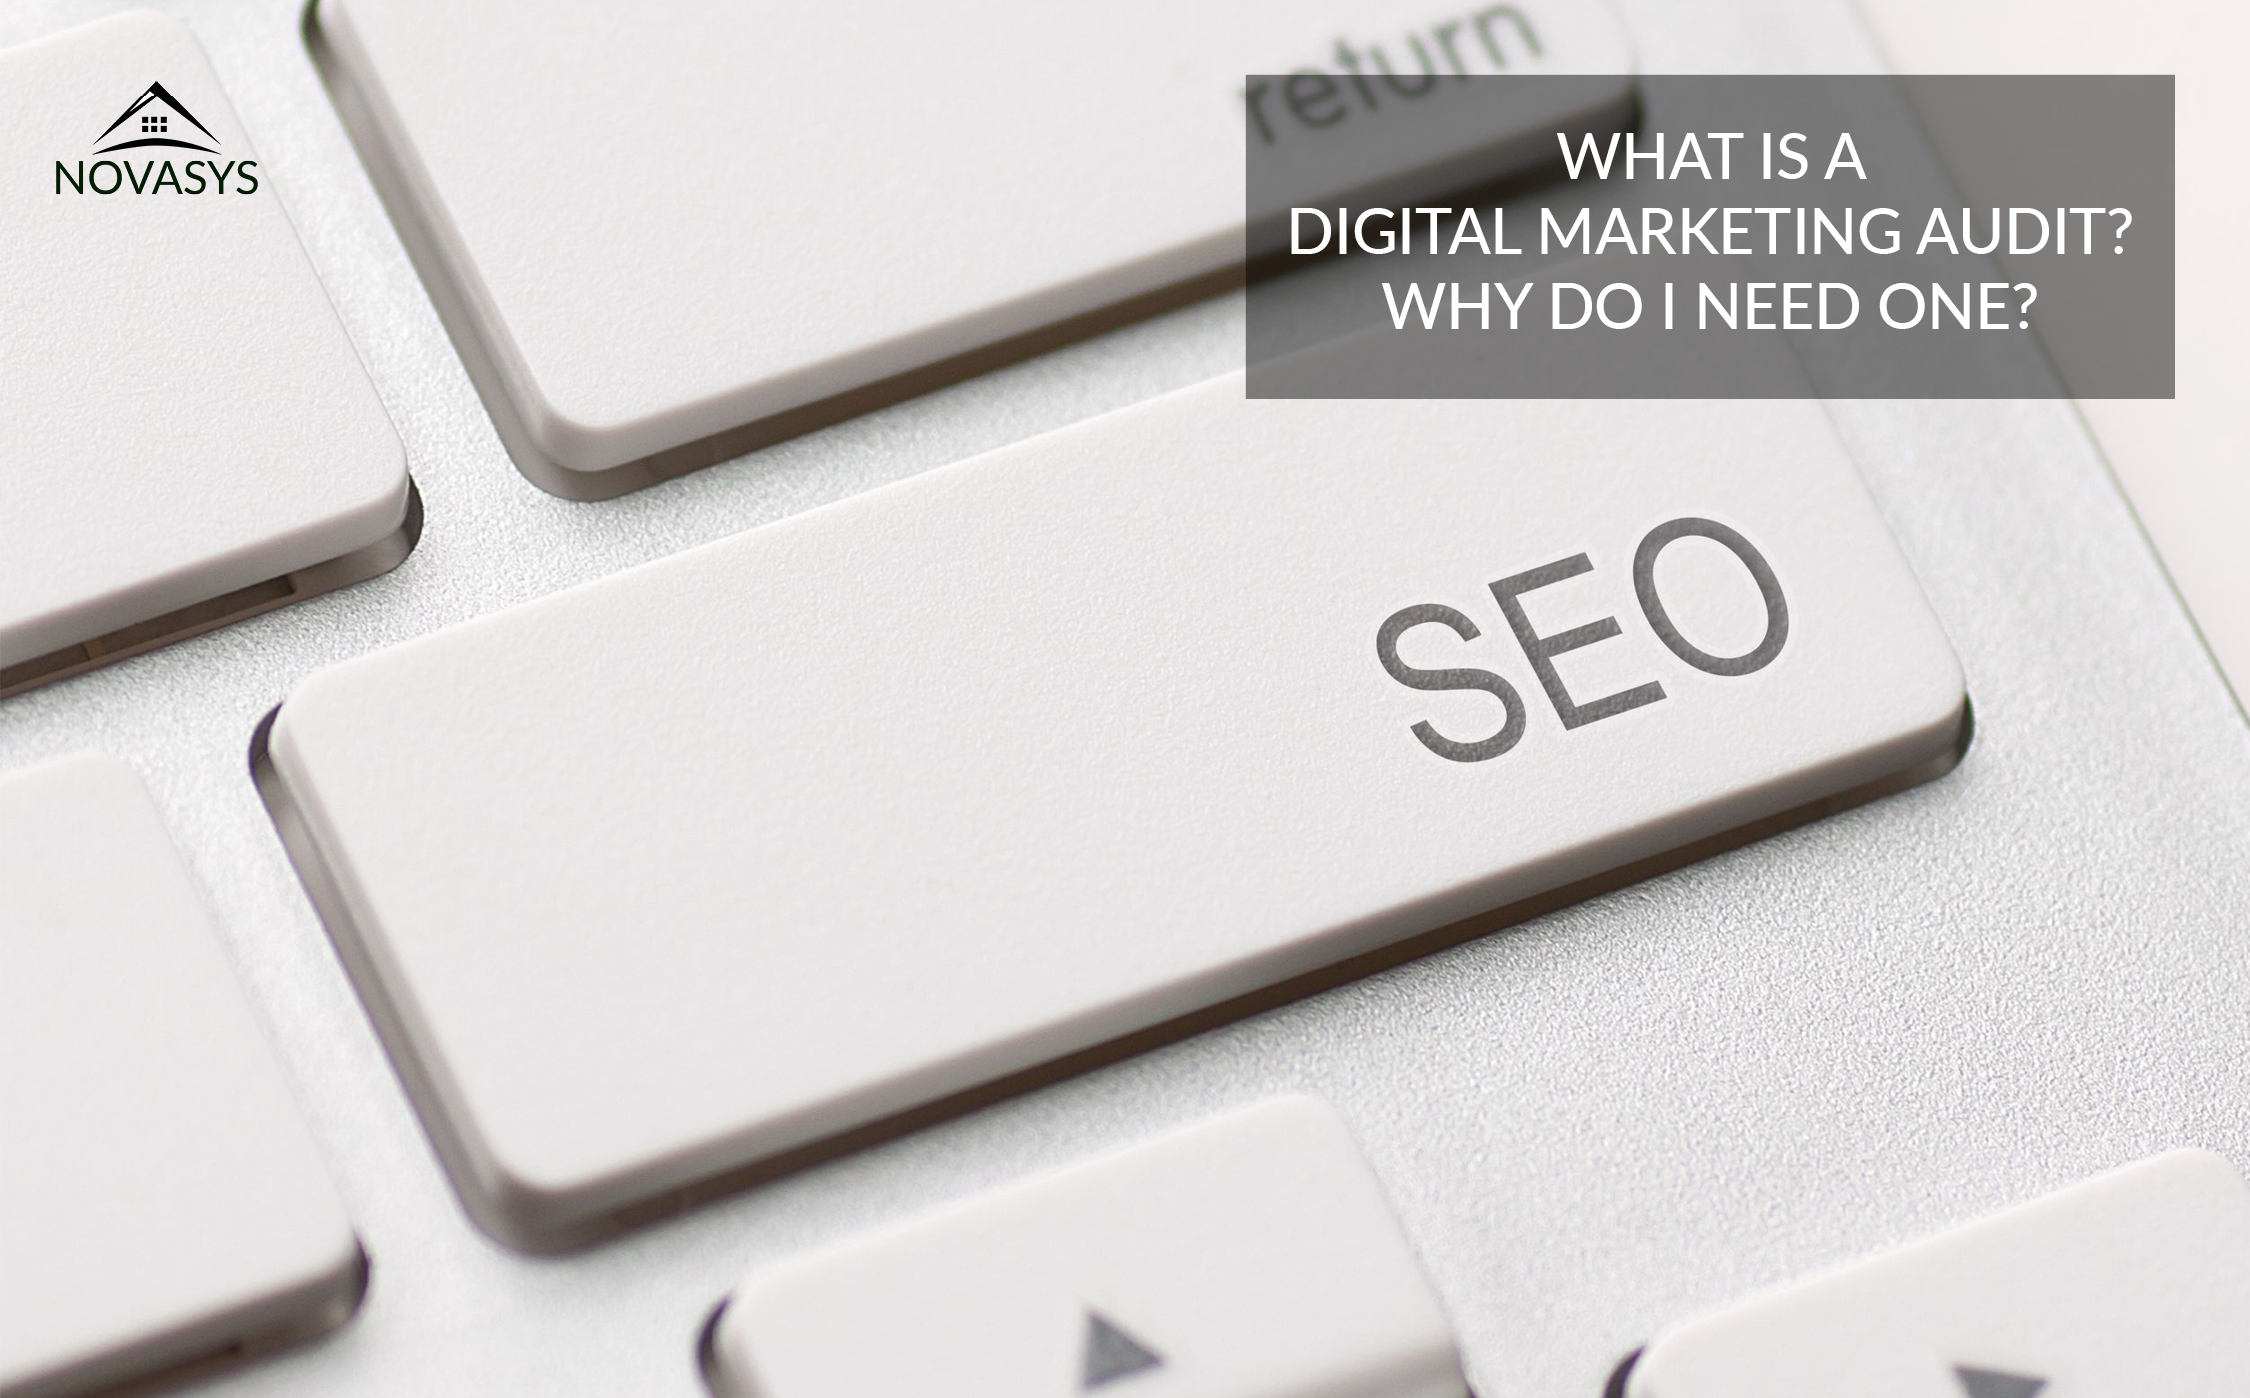 Why Does my Website Need a Digital Marketing Audit?